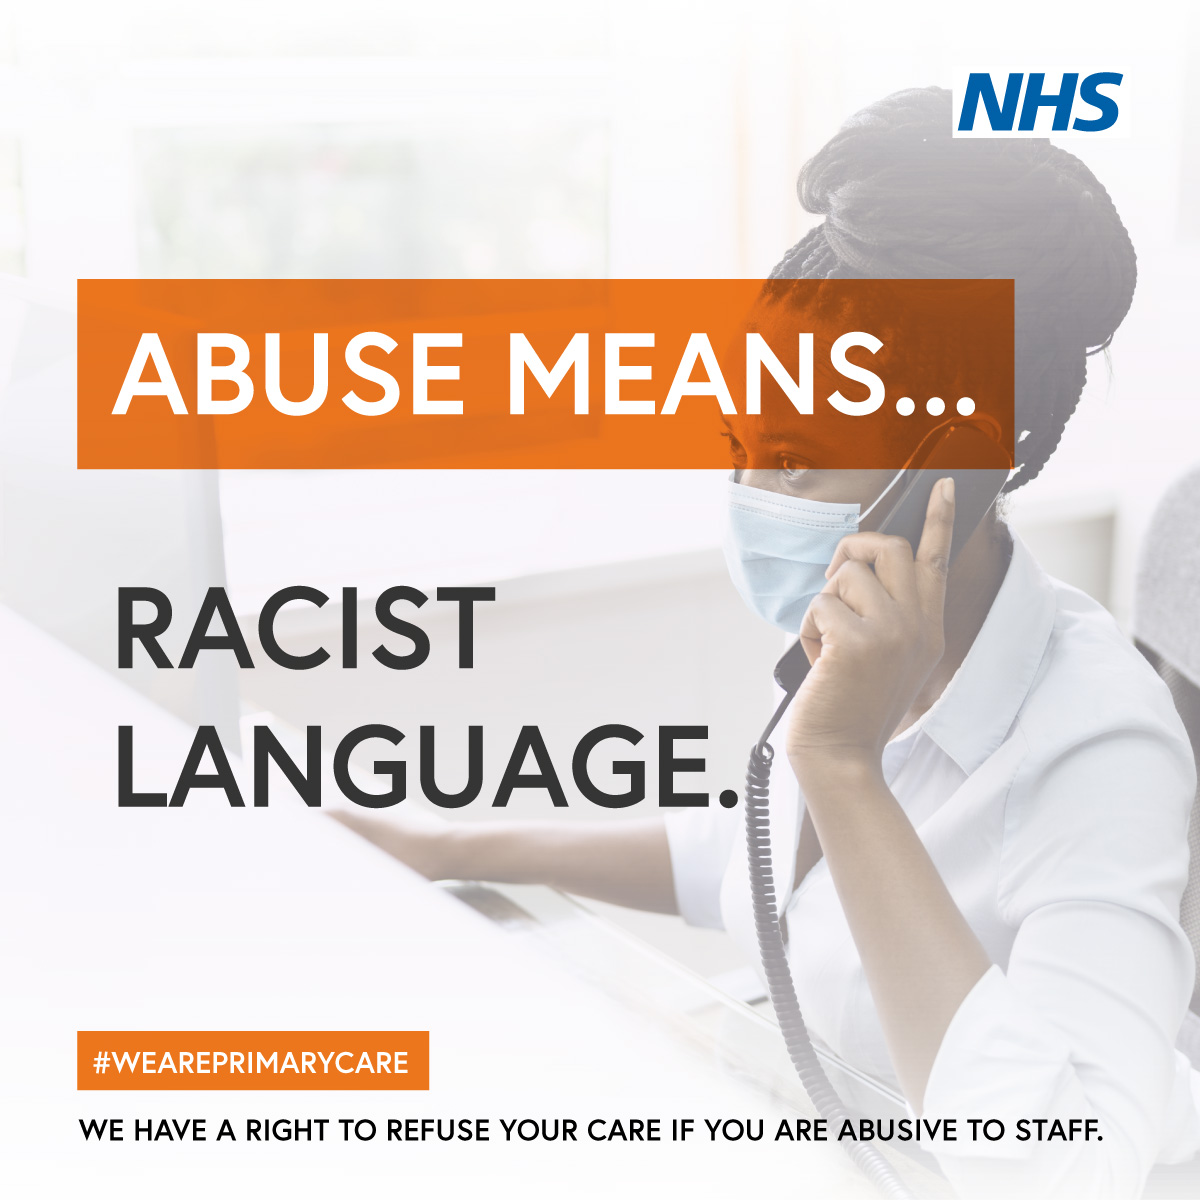 4 Abuse Means Racist Language